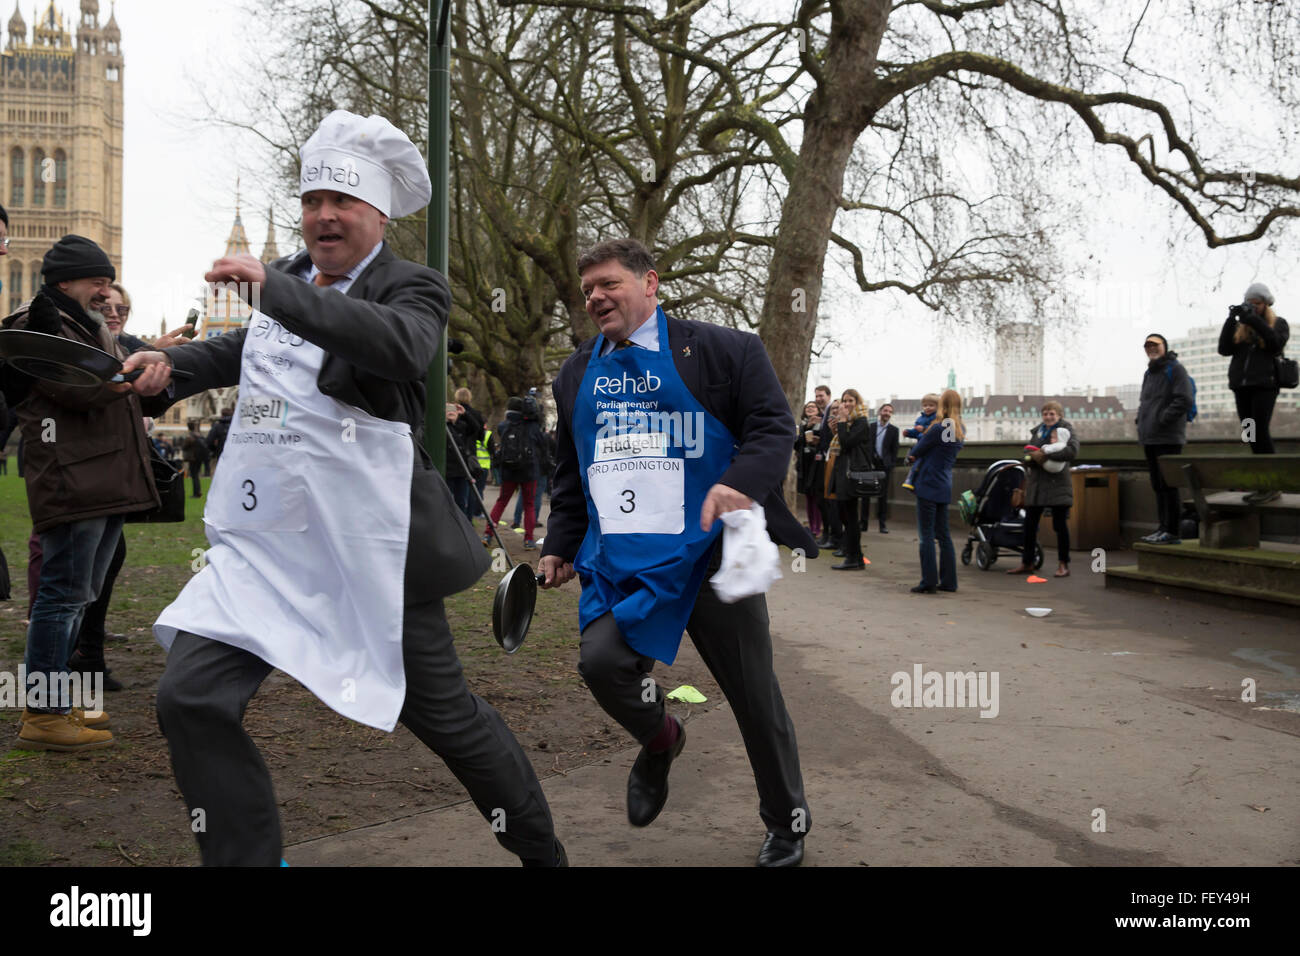 Westminster, London, UK. 9th February 2016. Rehab Parliamentary Pancake Race 2016 takes place as runners representing the House of Commons, the House of Lords and the Parliamentary Press Gallery race against each other while tossing pancakes Credit:  Keith Larby/Alamy Live News Stock Photo